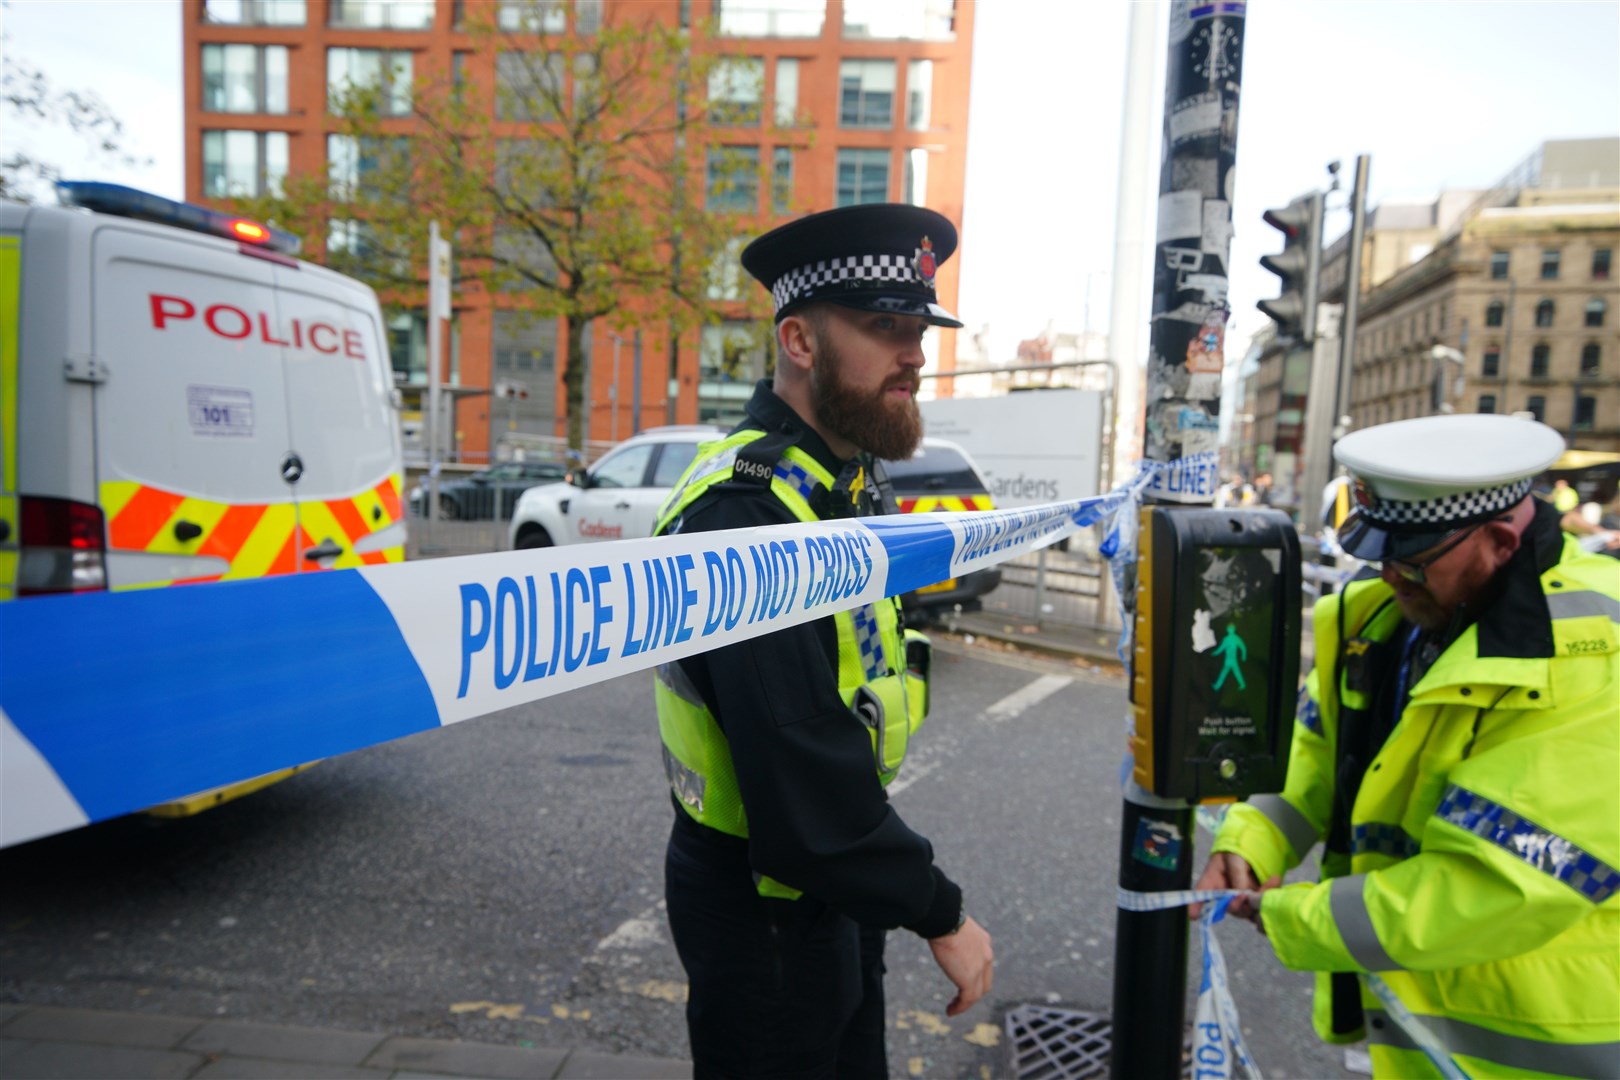 Police officers at the cordon in central Manchester (Peter Byrne/PA)